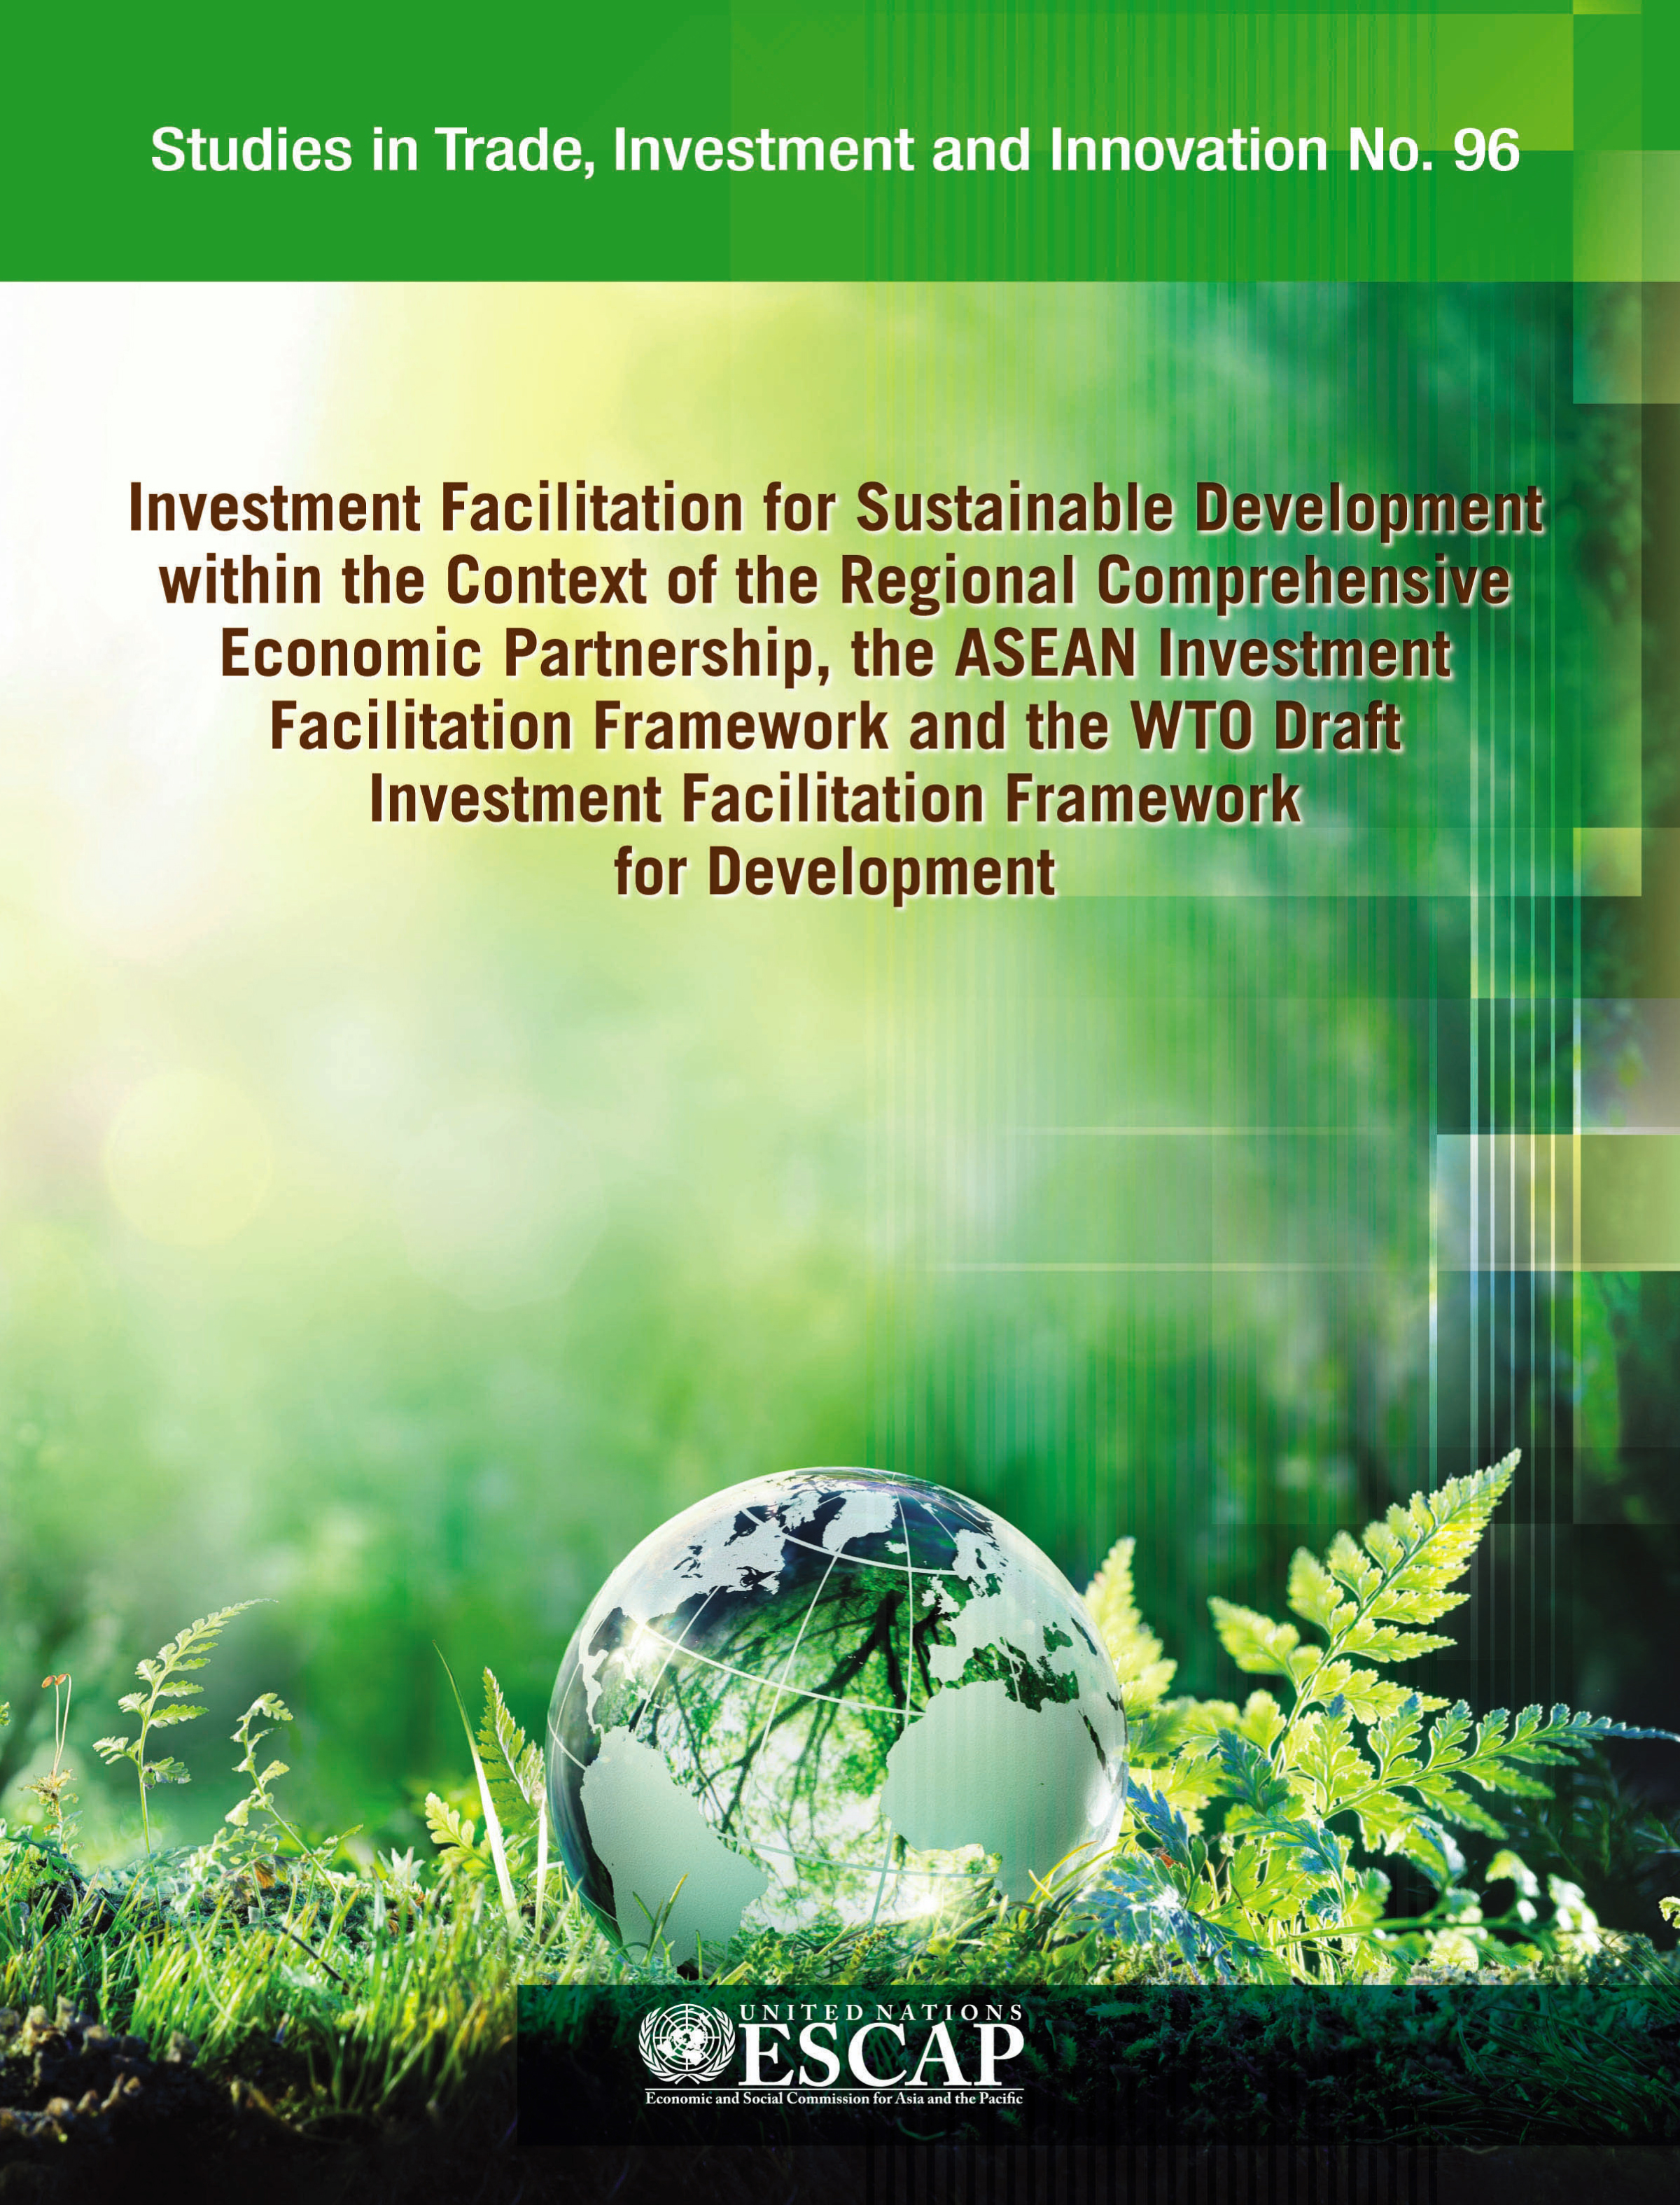 image of Investment Facilitation for Sustainable Development within the Context of the Regional Comprehensive Economic Partnership, the ASEAN Investment Facilitation Framework and the WTO Draft Investment Facilitation Framework for Development